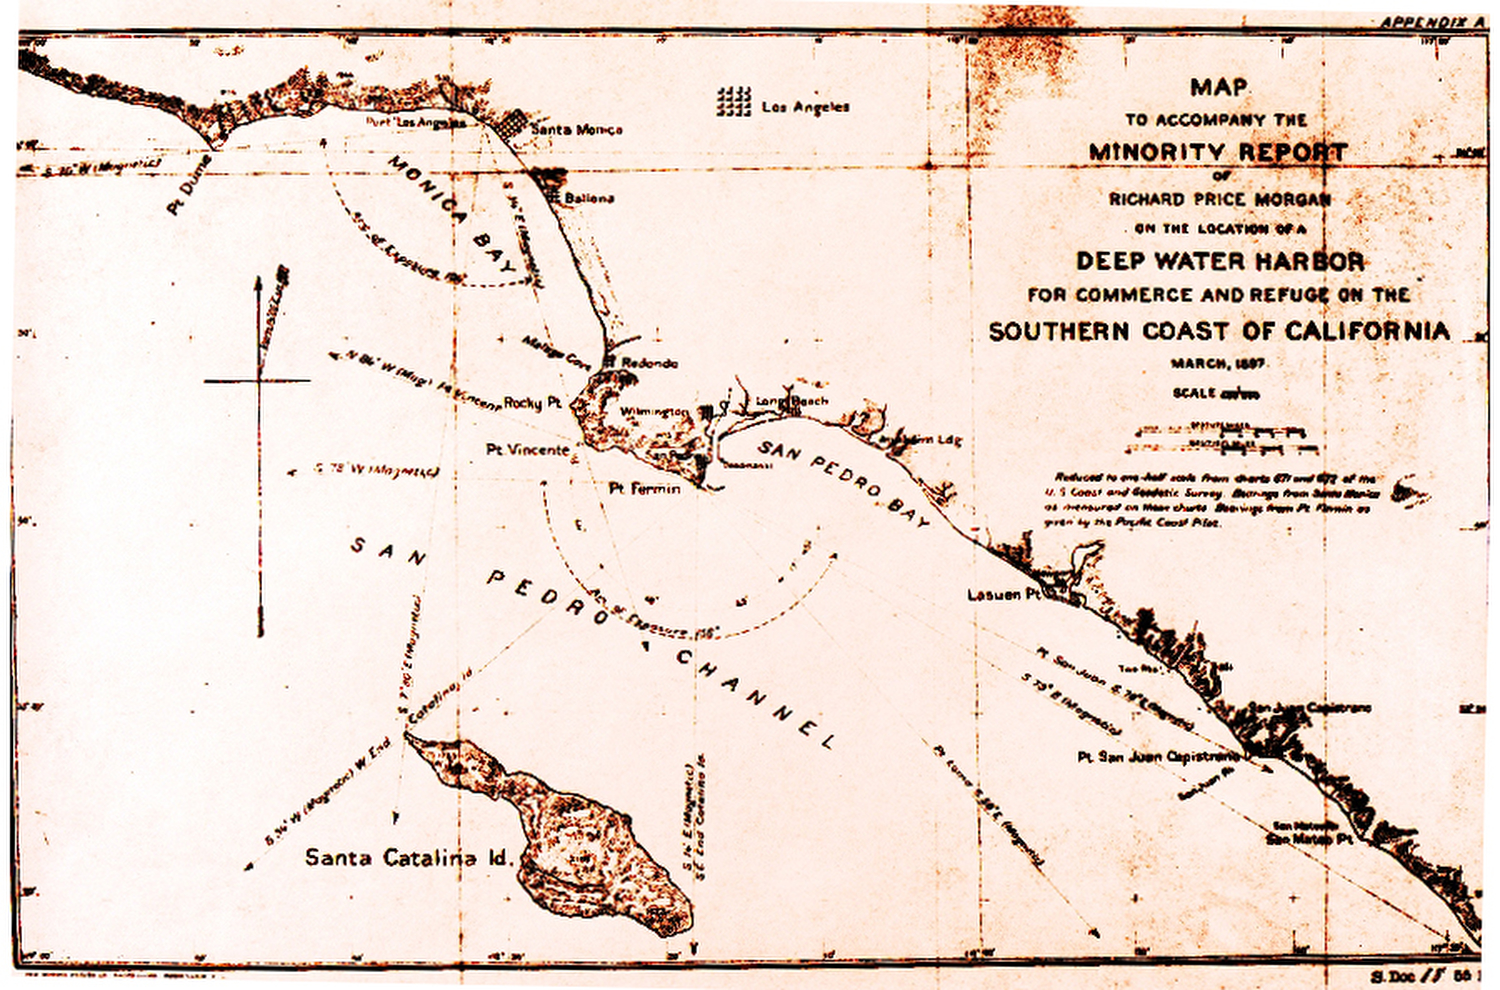 A map looking at San Pedro Bay vs. Santa Monica Bay for the eventual location of a Port complex. Despite powerful opposition from railroad interests, San Pedro Bay finally was chosen.